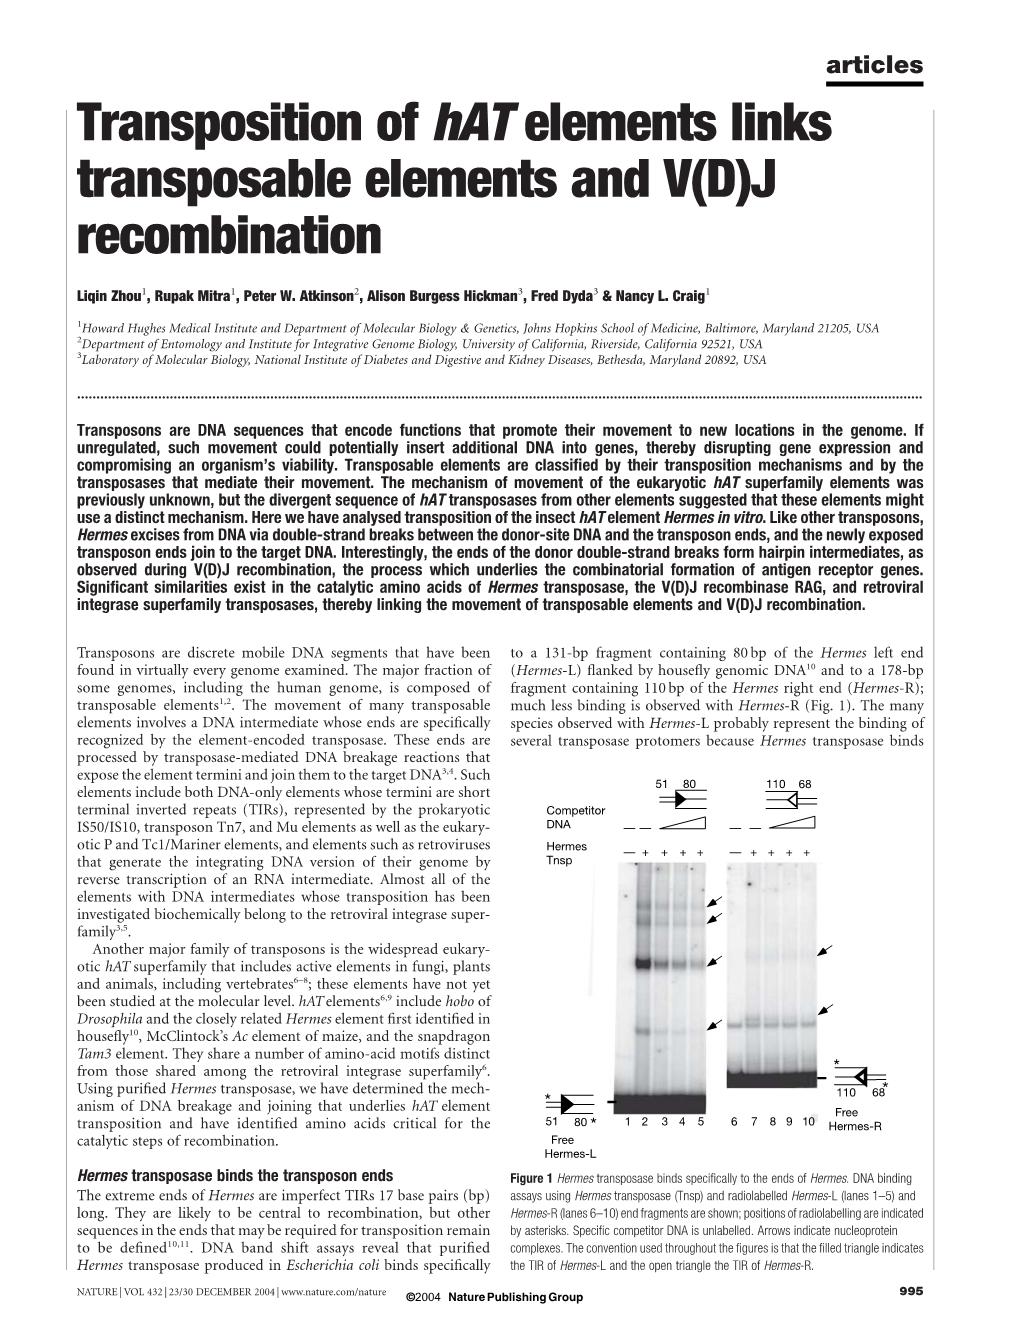 Transposition of Hat Elements Links Transposable Elements and V(D)J Recombination